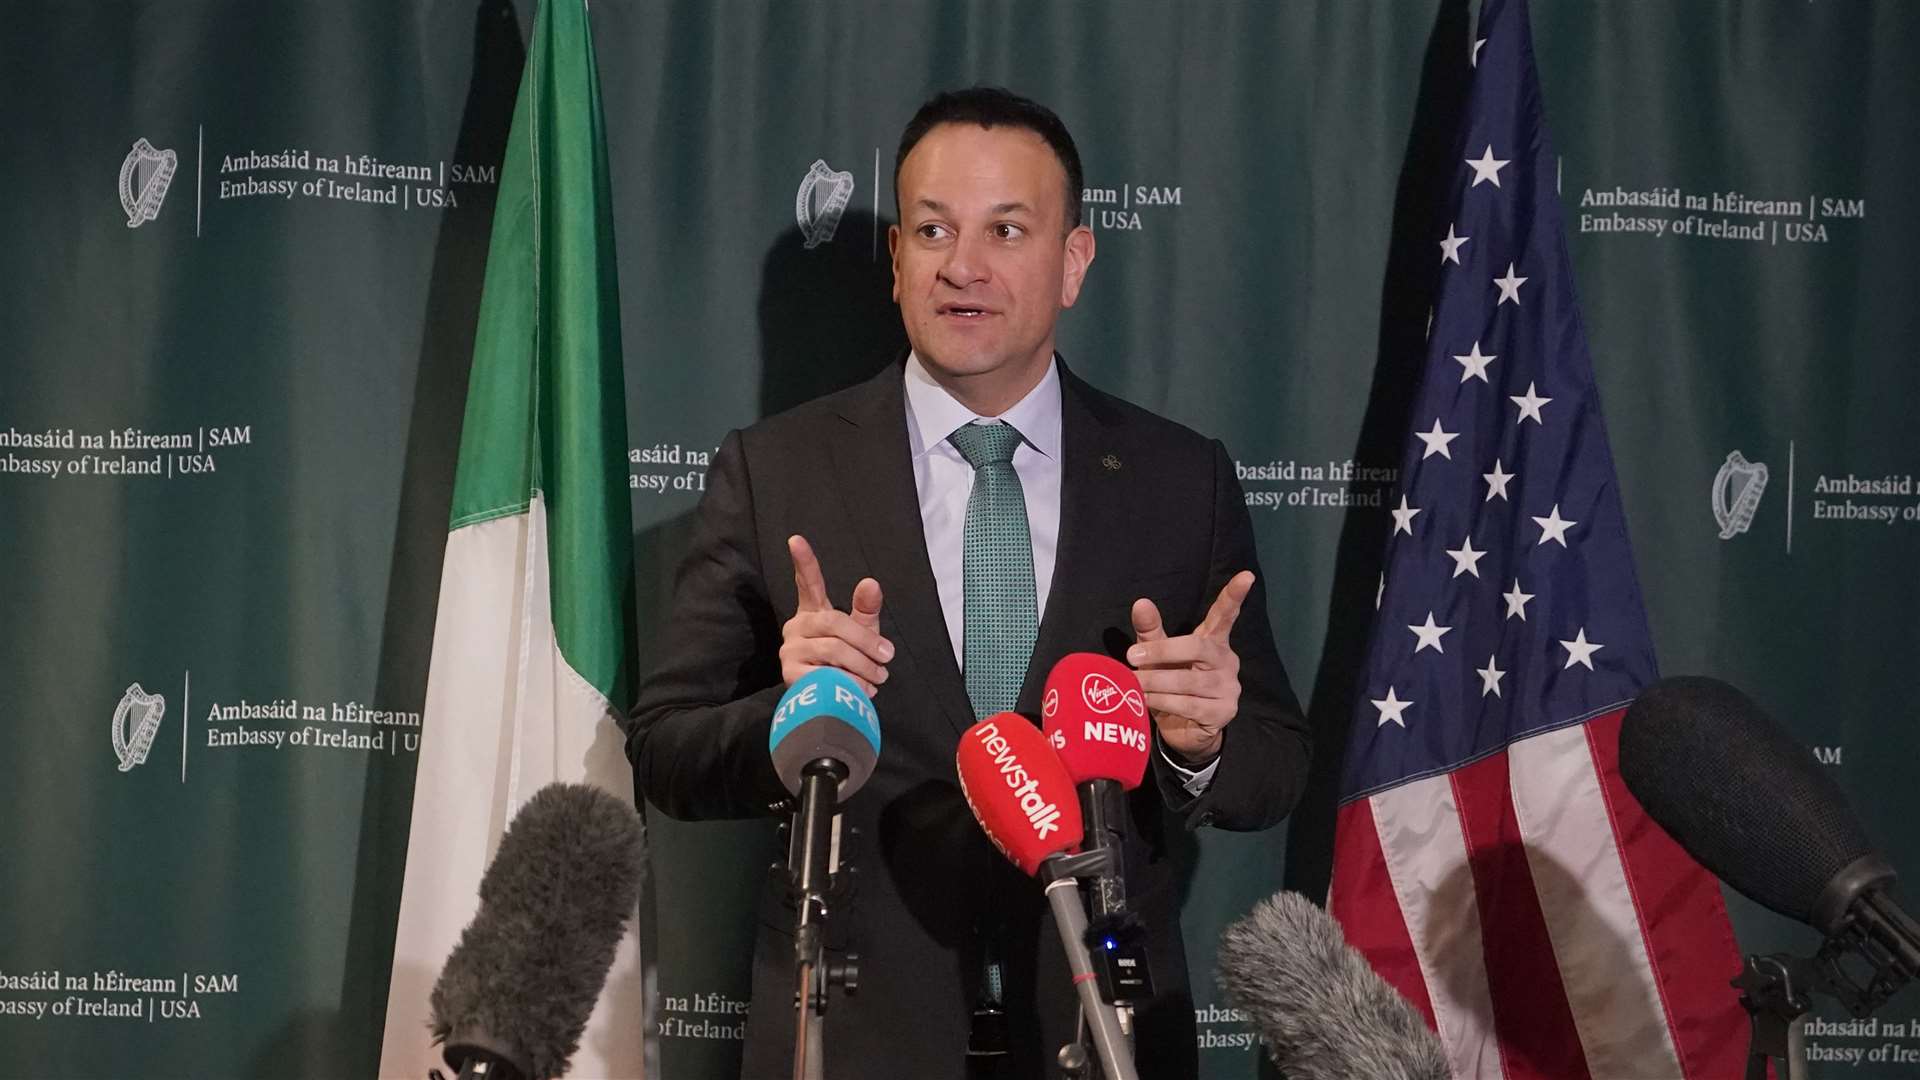 Taoiseach Leo Varadkar speaking in the Senate Room at the Mayflower Hotel in Washington DC earlier in the day (Niall Carson/PA)